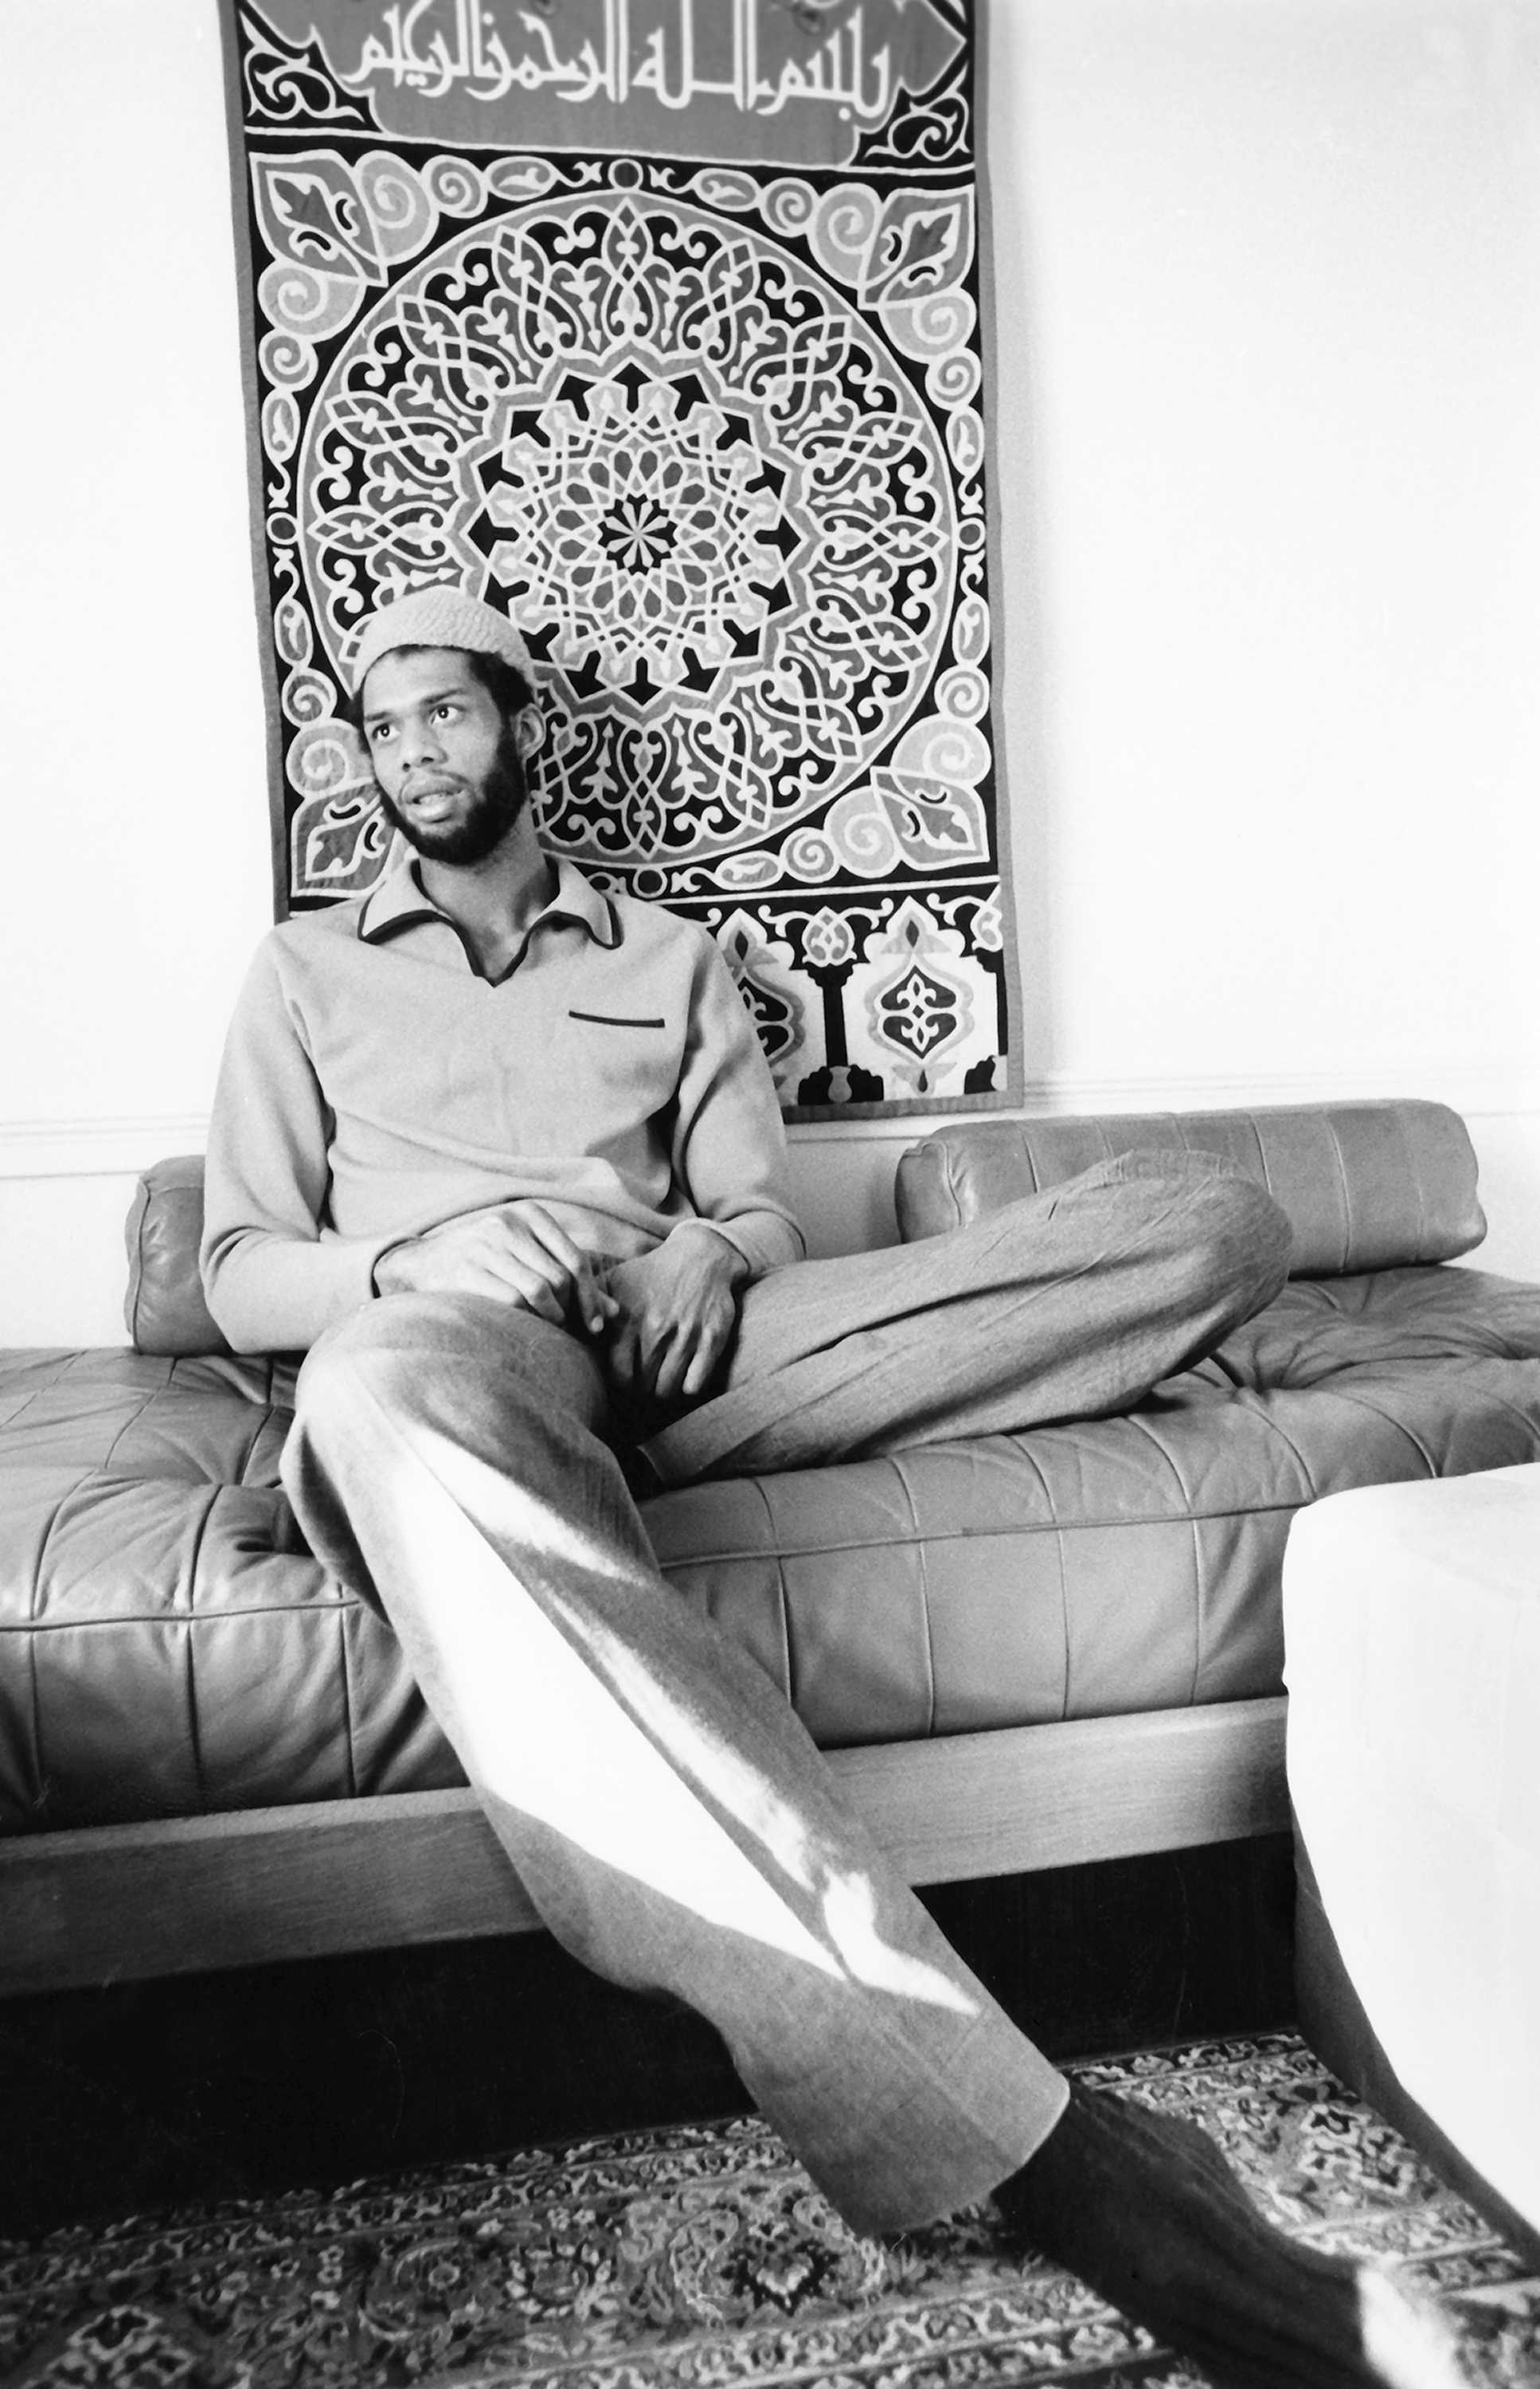 Black and white photograph of Kareem Abdul-Jabbar at home sitting on a couch